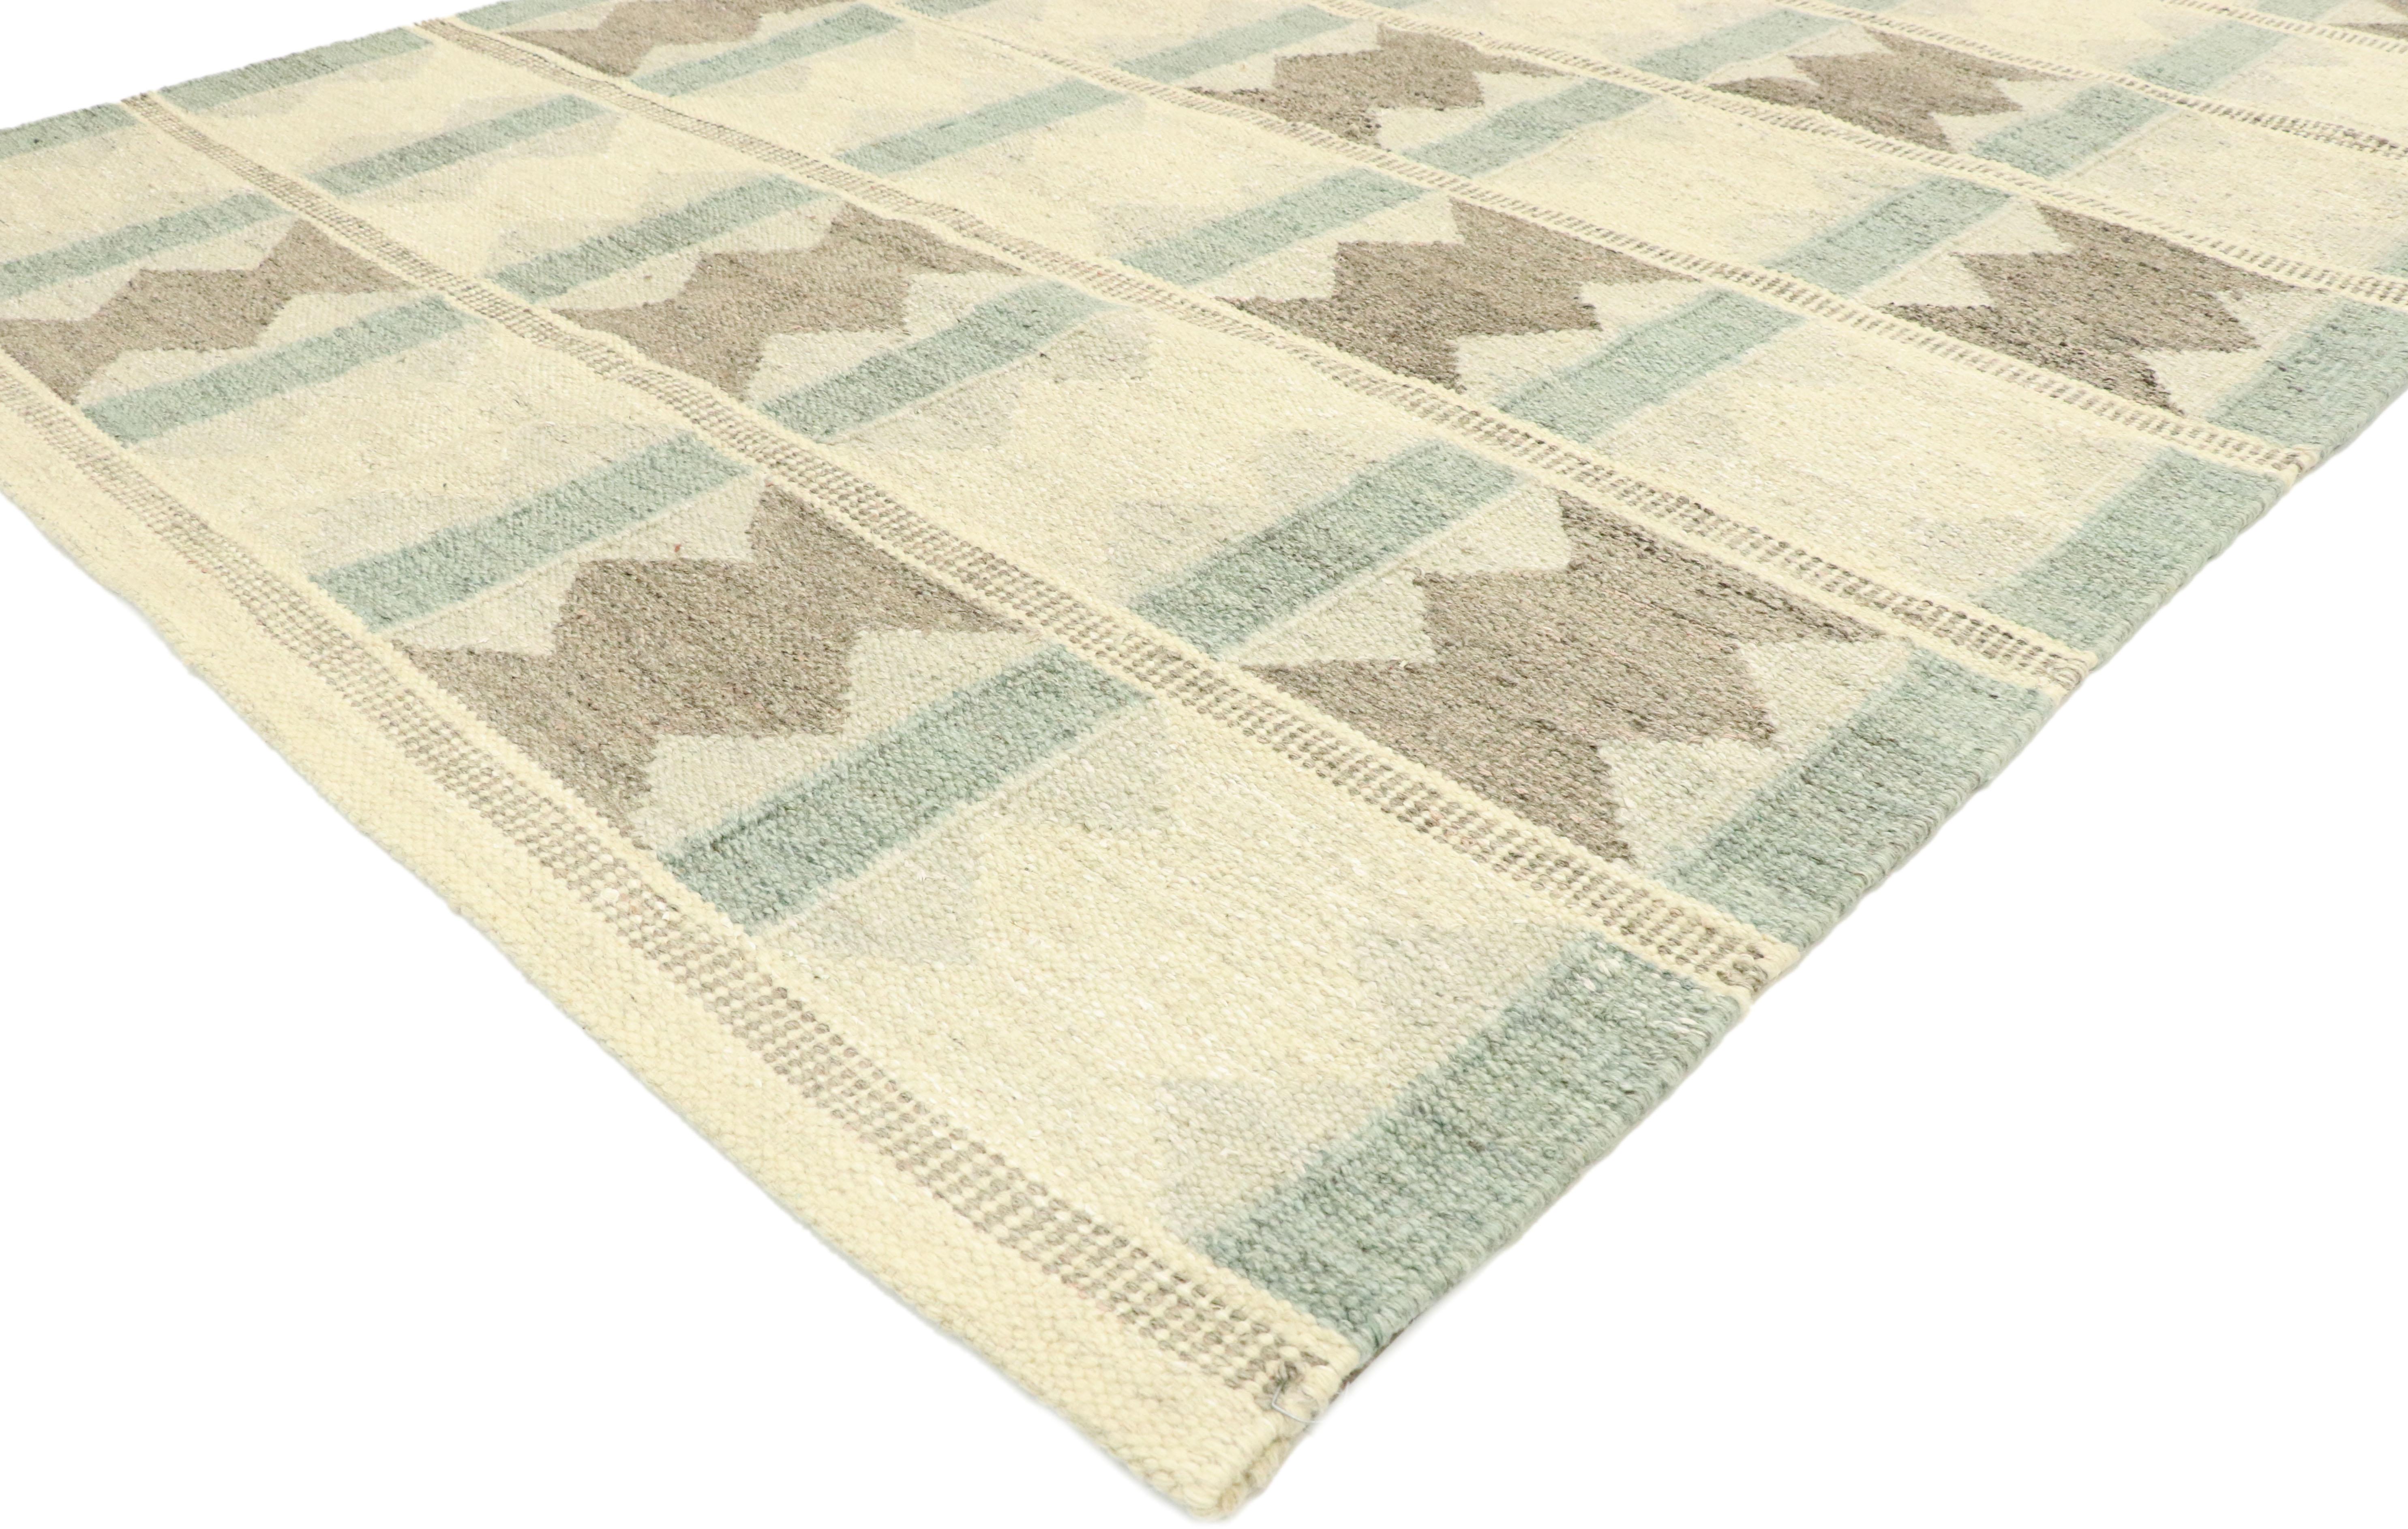 30526 New Contemporary Swedish Indian Kilim Rug with Scandinavian Modern Style 05'04 x 08'02. With its geometric design and bohemian hygge vibes, this hand-woven wool Swedish Indian Kilim rug beautifully embodies the simplicity of Scandinavian